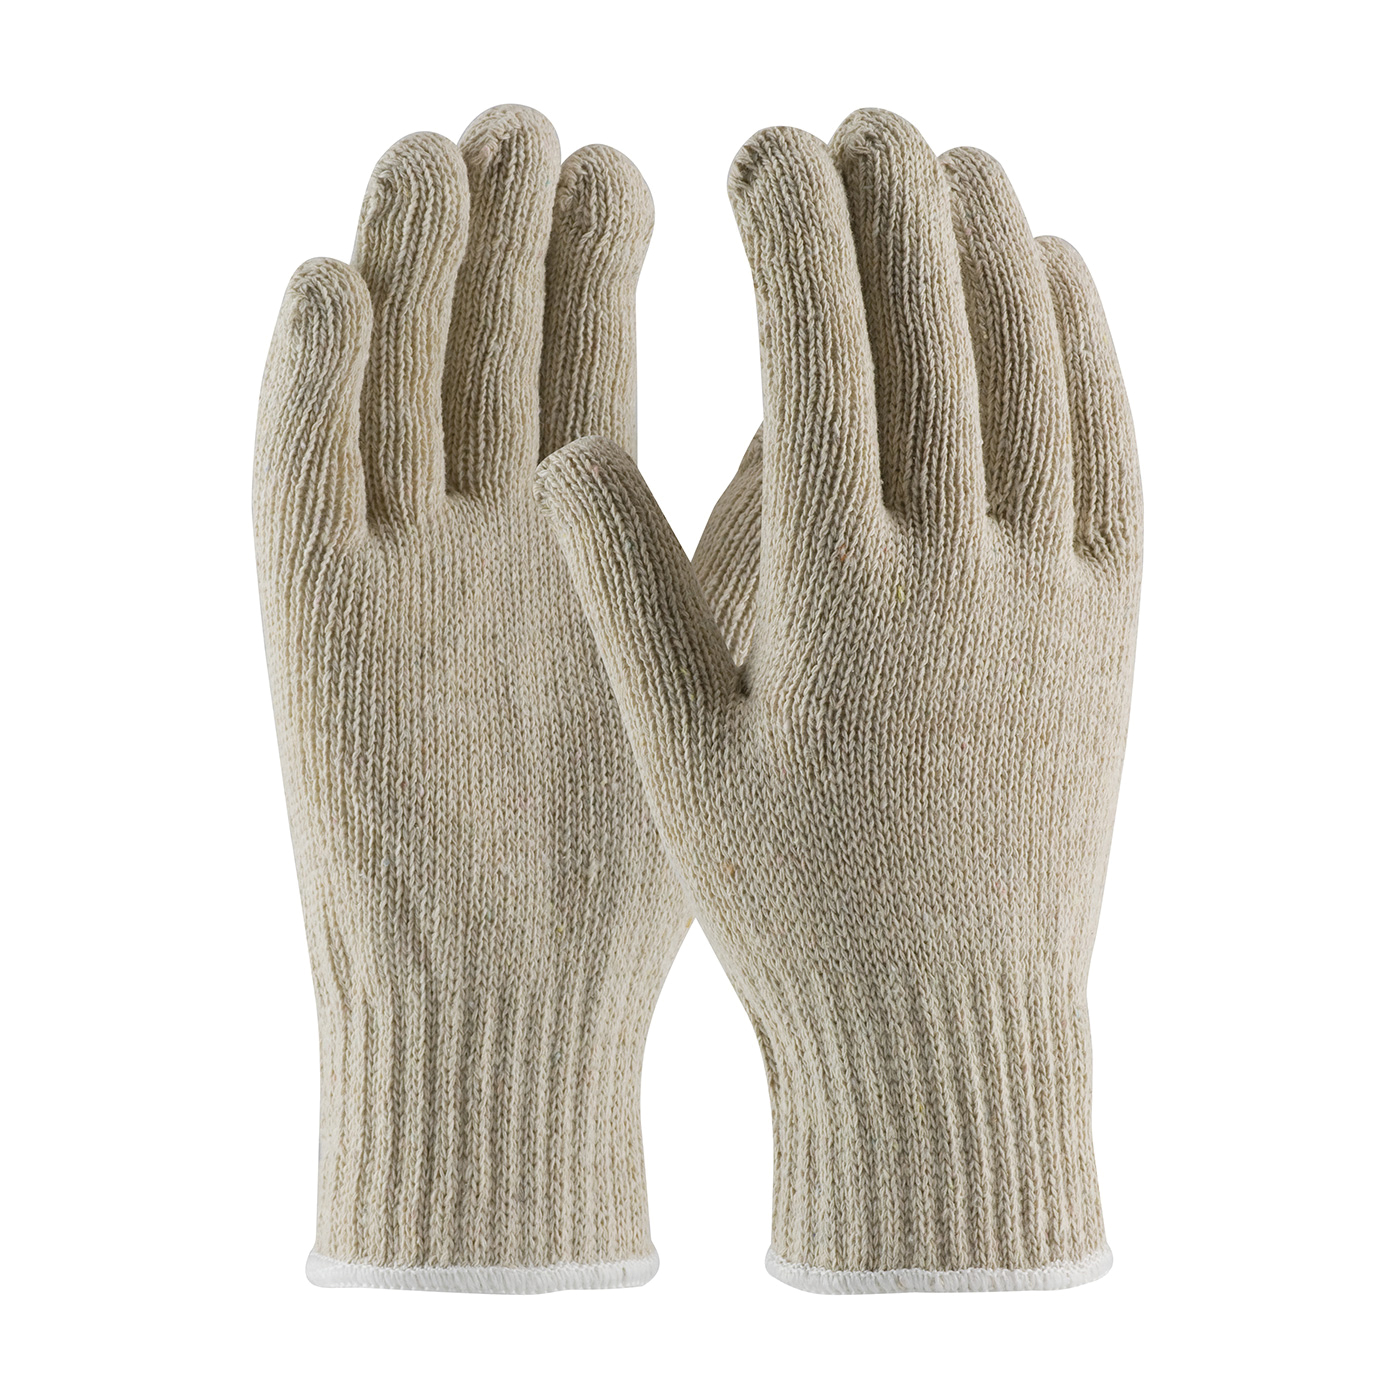 PIP® 712S Unisex General Purpose Gloves, Work, Full Finger/Seamless Style, L, Cotton/Polyester Palm, Cotton/Polyester, Natural White, Ribbed Knit Wrist Cuff